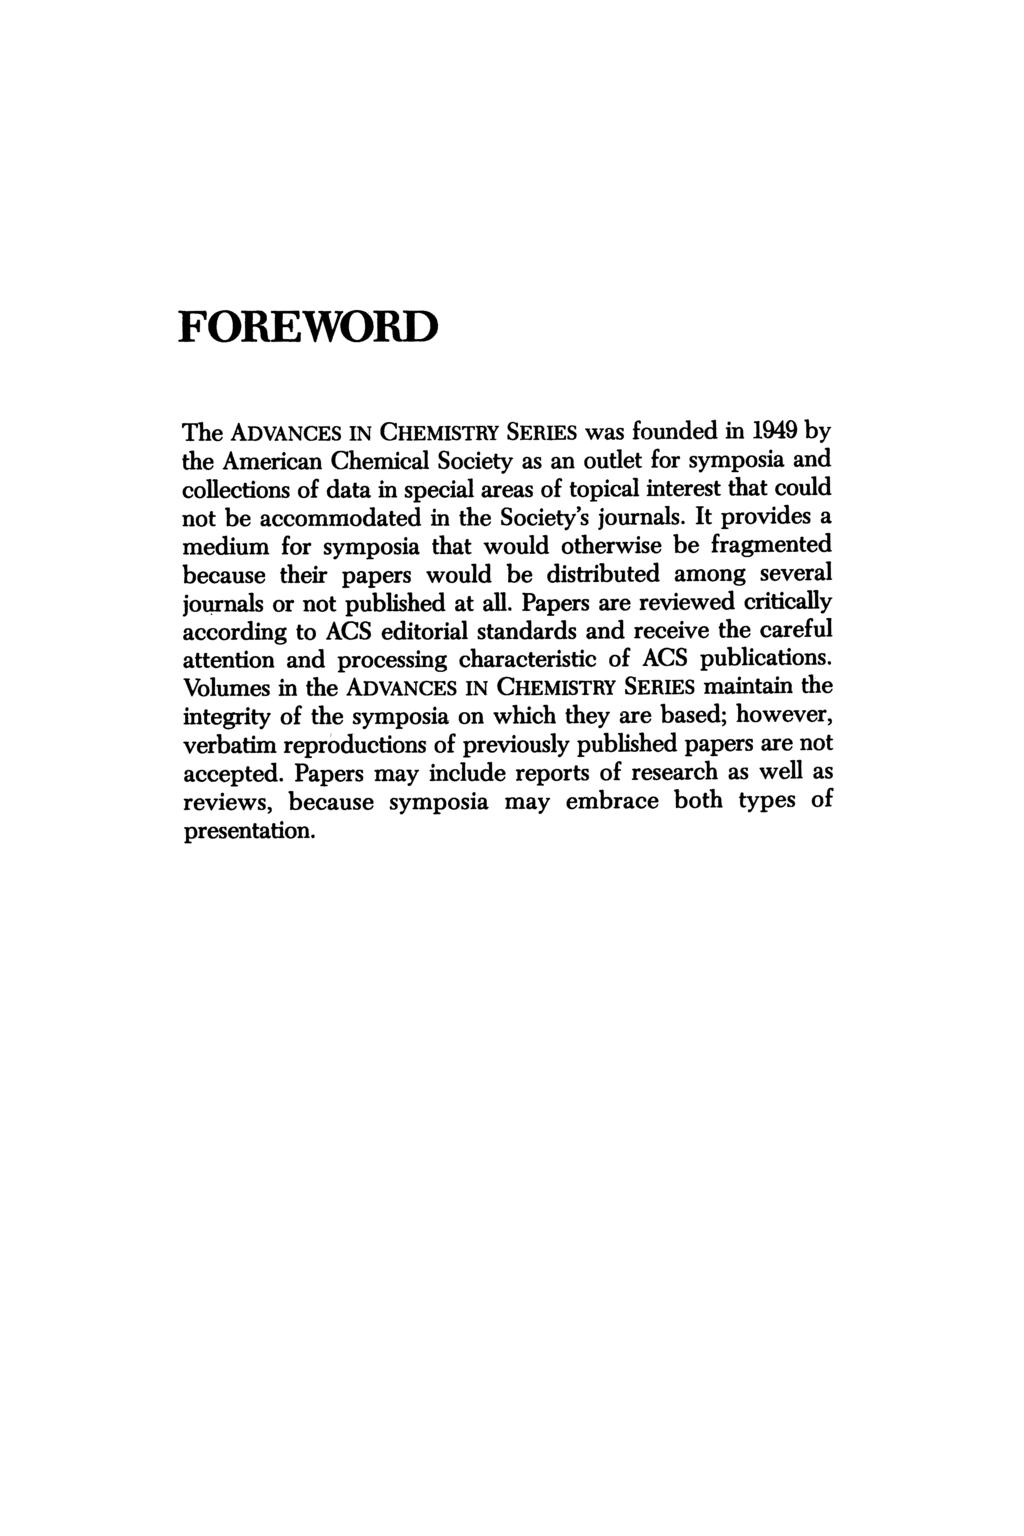 FOREWORD The ADVANCES IN CHEMISTRY SERIES was founded in 1949 by the American Chemical Society as an outlet for symposia and collections of data in special areas of topical interest that could not be